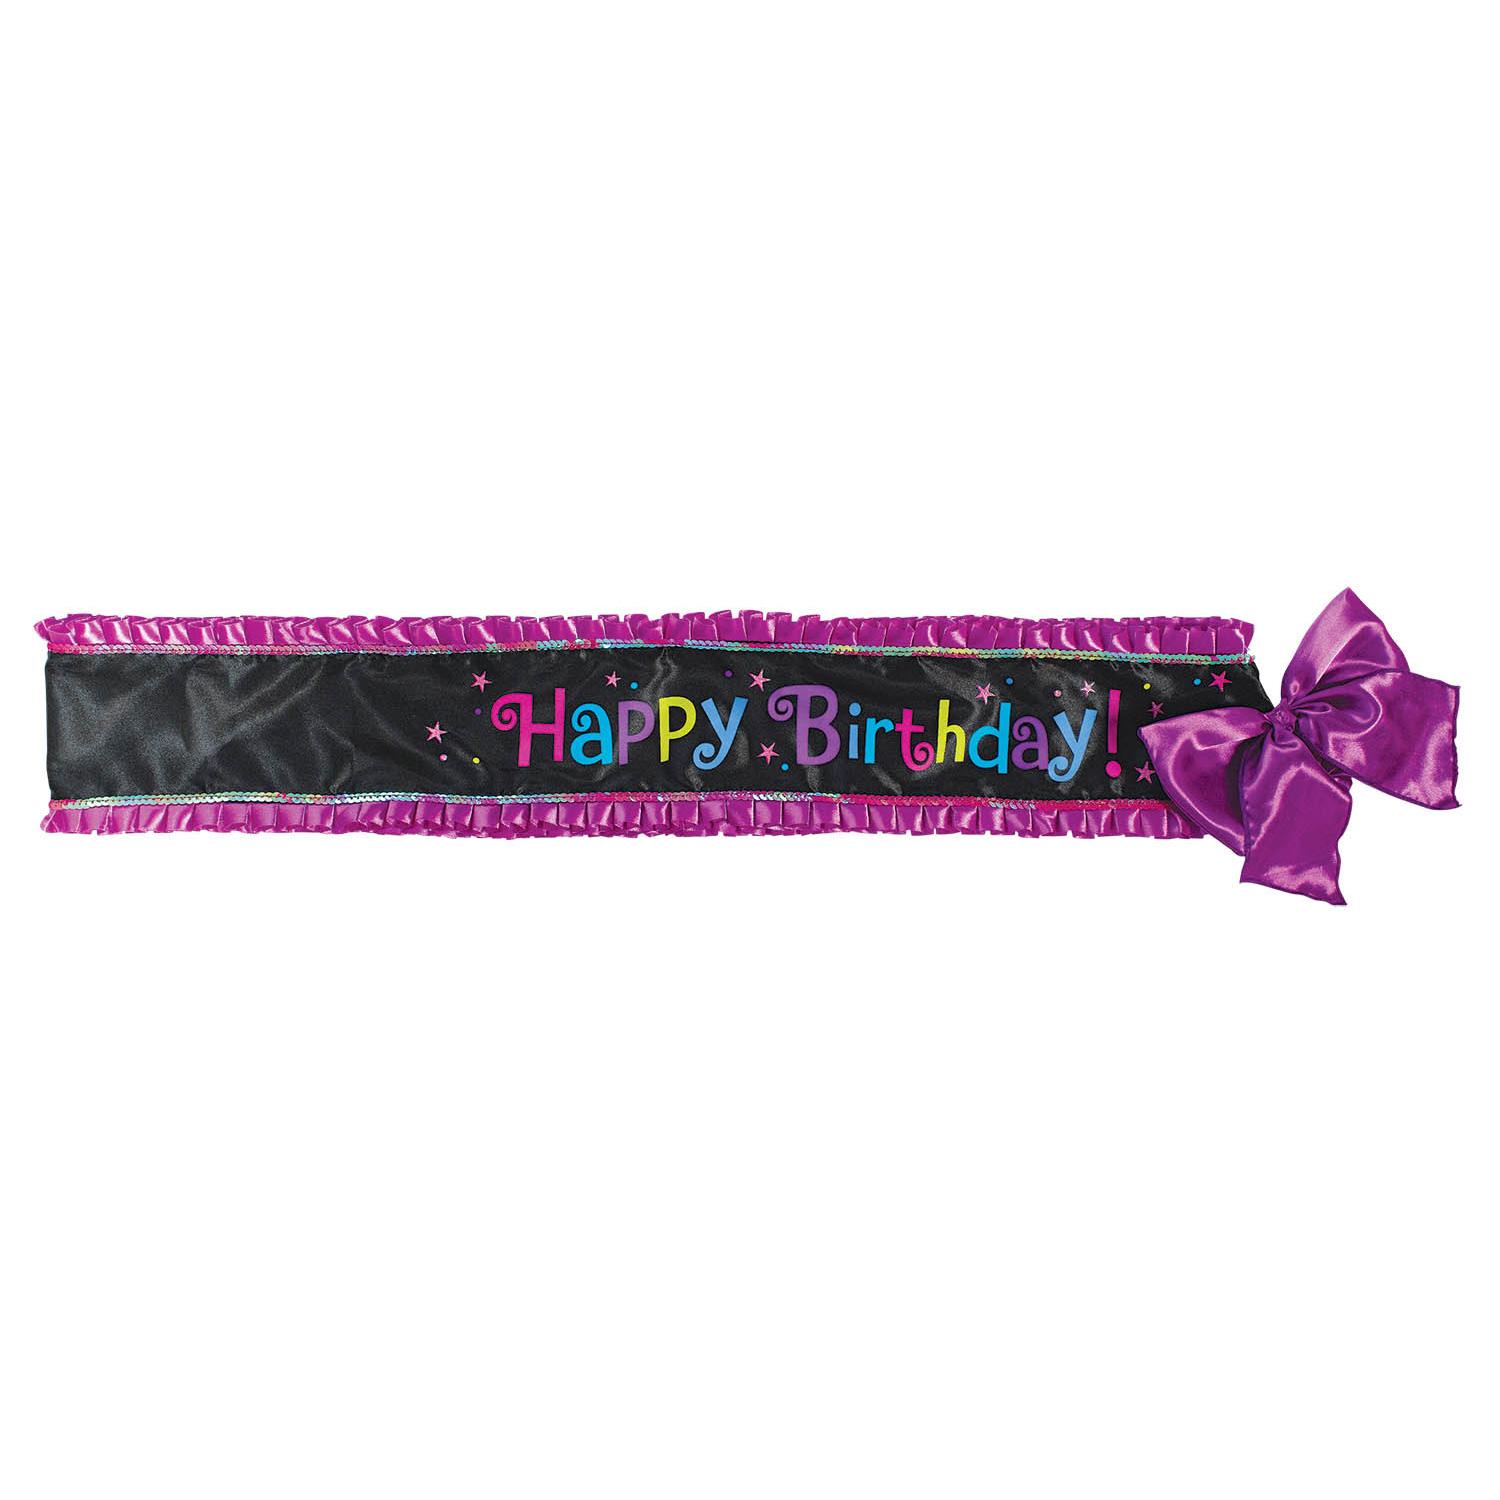 Birthday Chic Deluxe Fabric Sash Costumes & Apparel - Party Centre - Party Centre